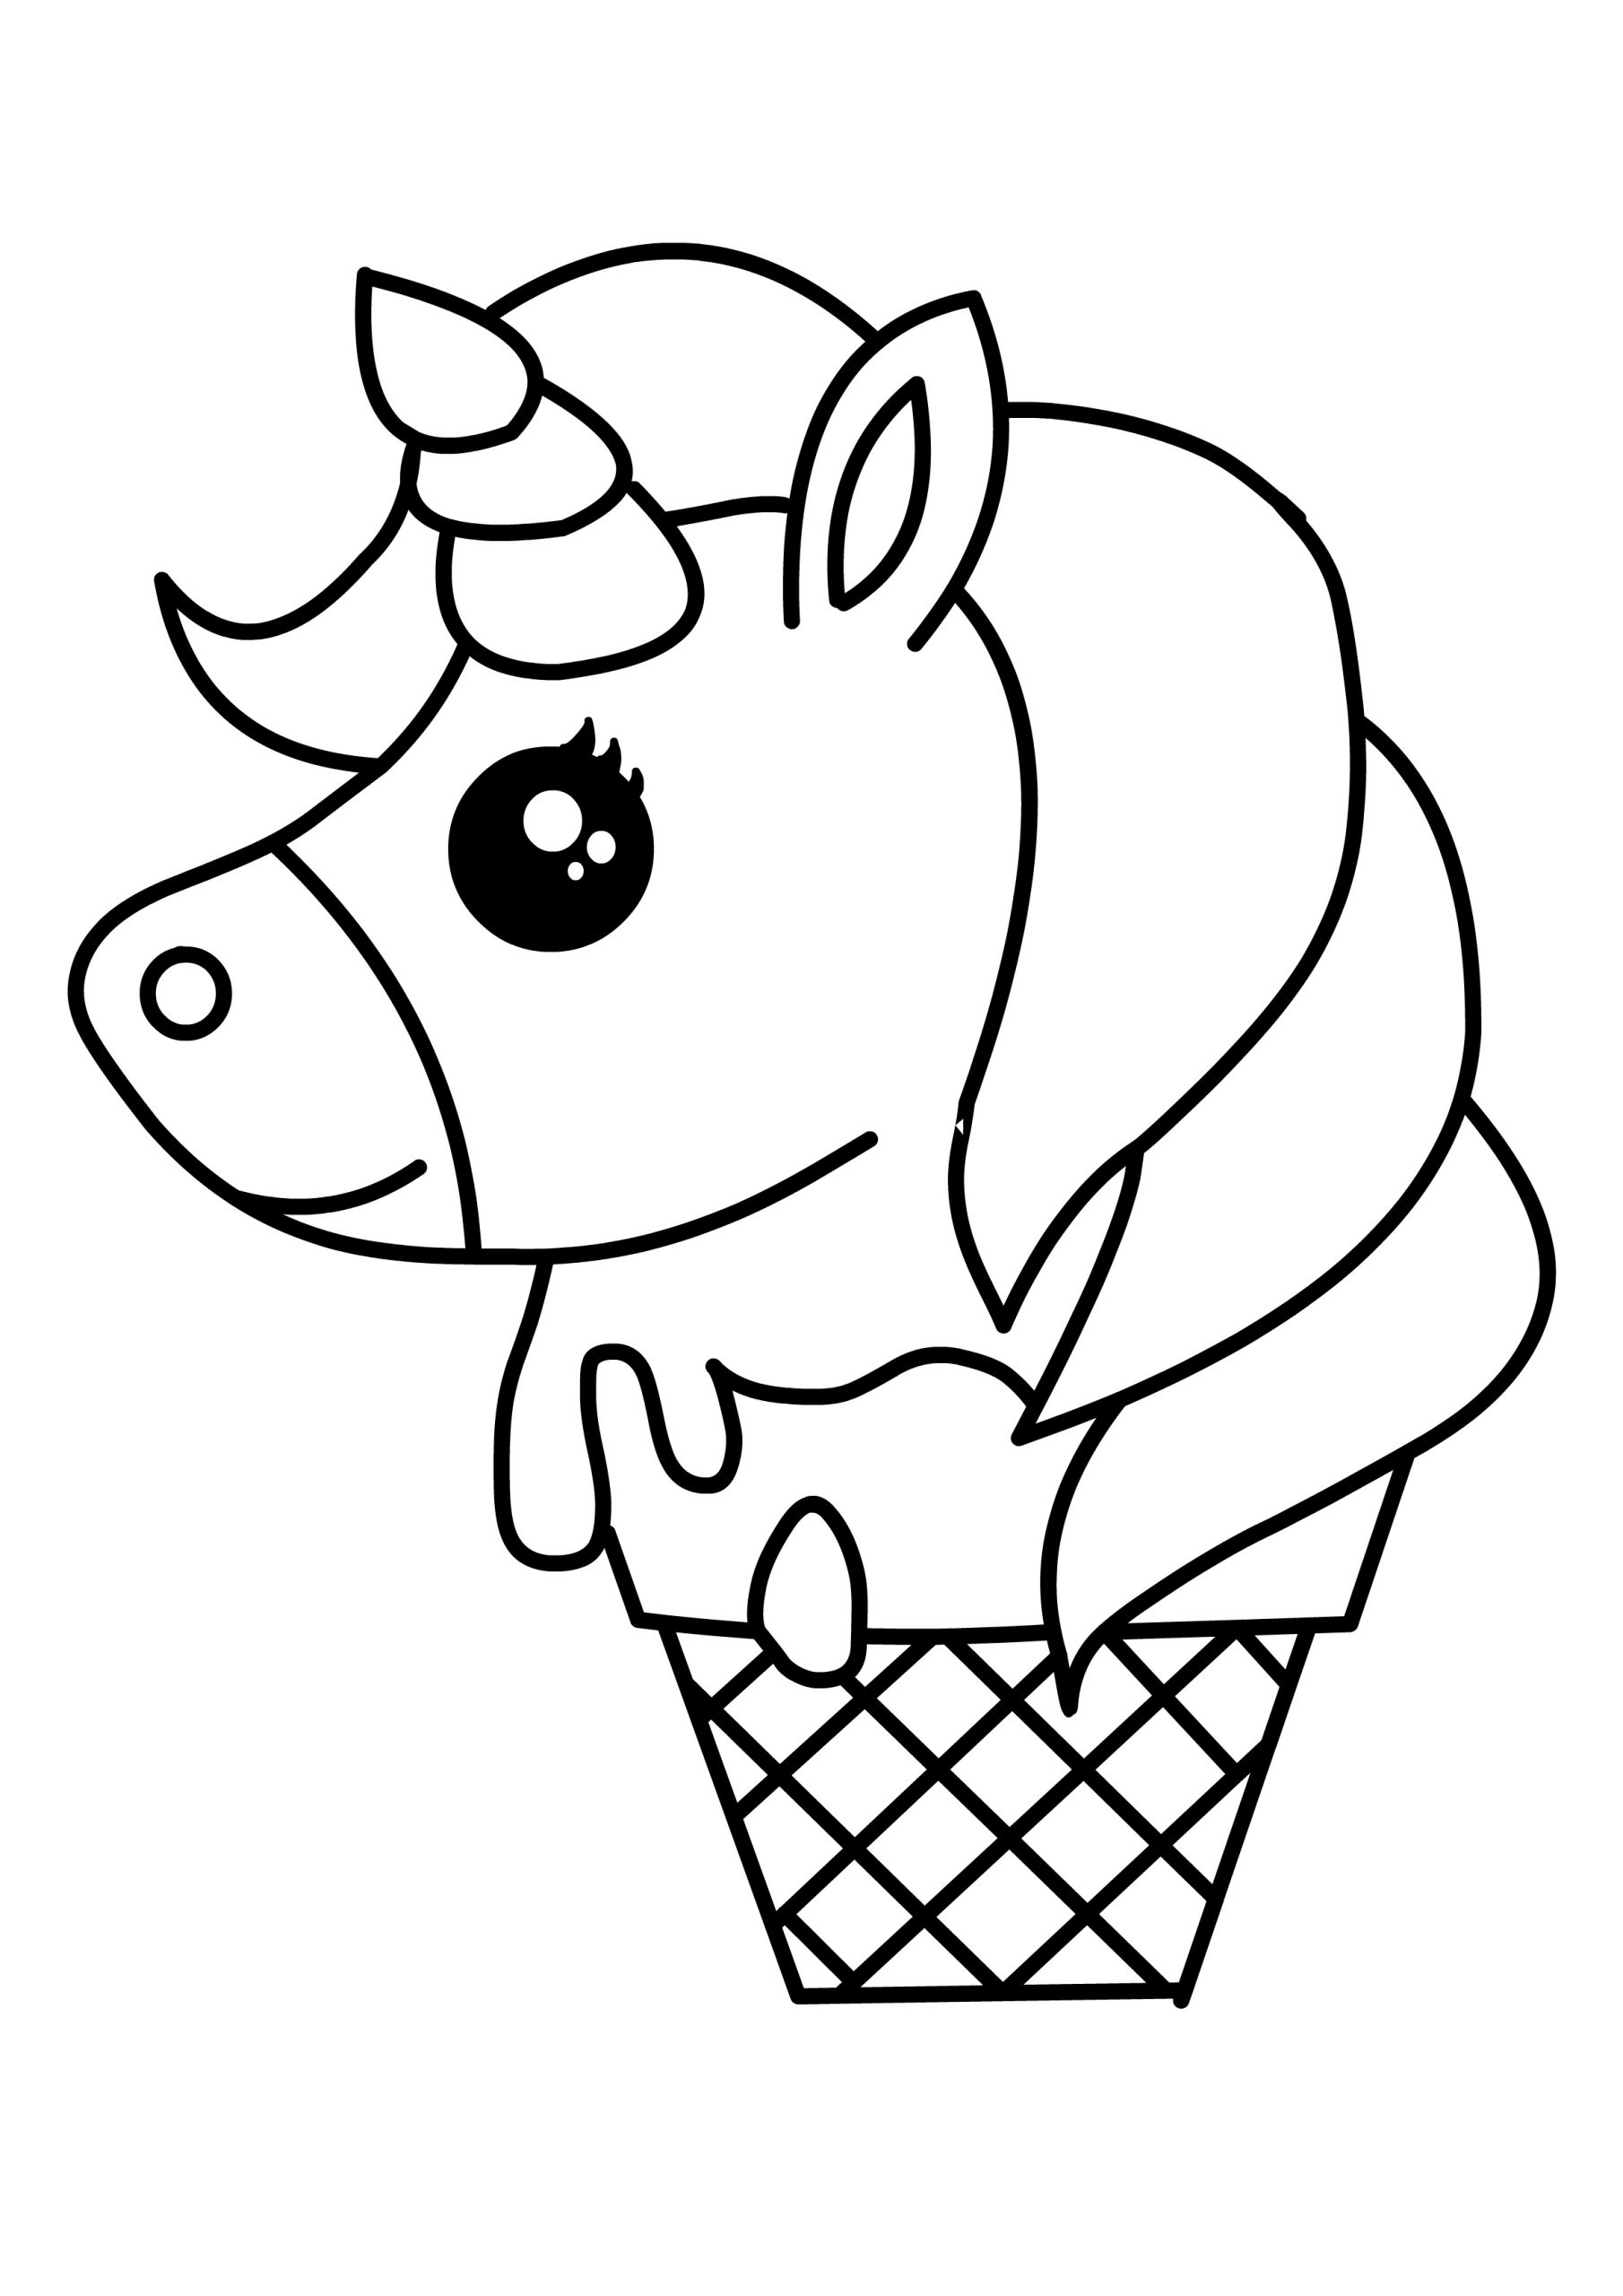 Coloring Pages Unicorn Ice Cream   Coloring Pages For Kids ...